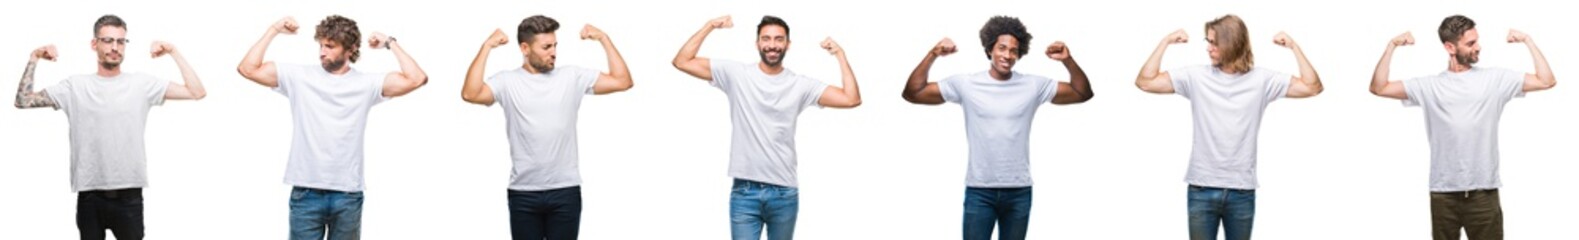 Collage of young caucasian, hispanic, afro men wearing white t-shirt over white isolated background showing arms muscles smiling proud. Fitness concept.